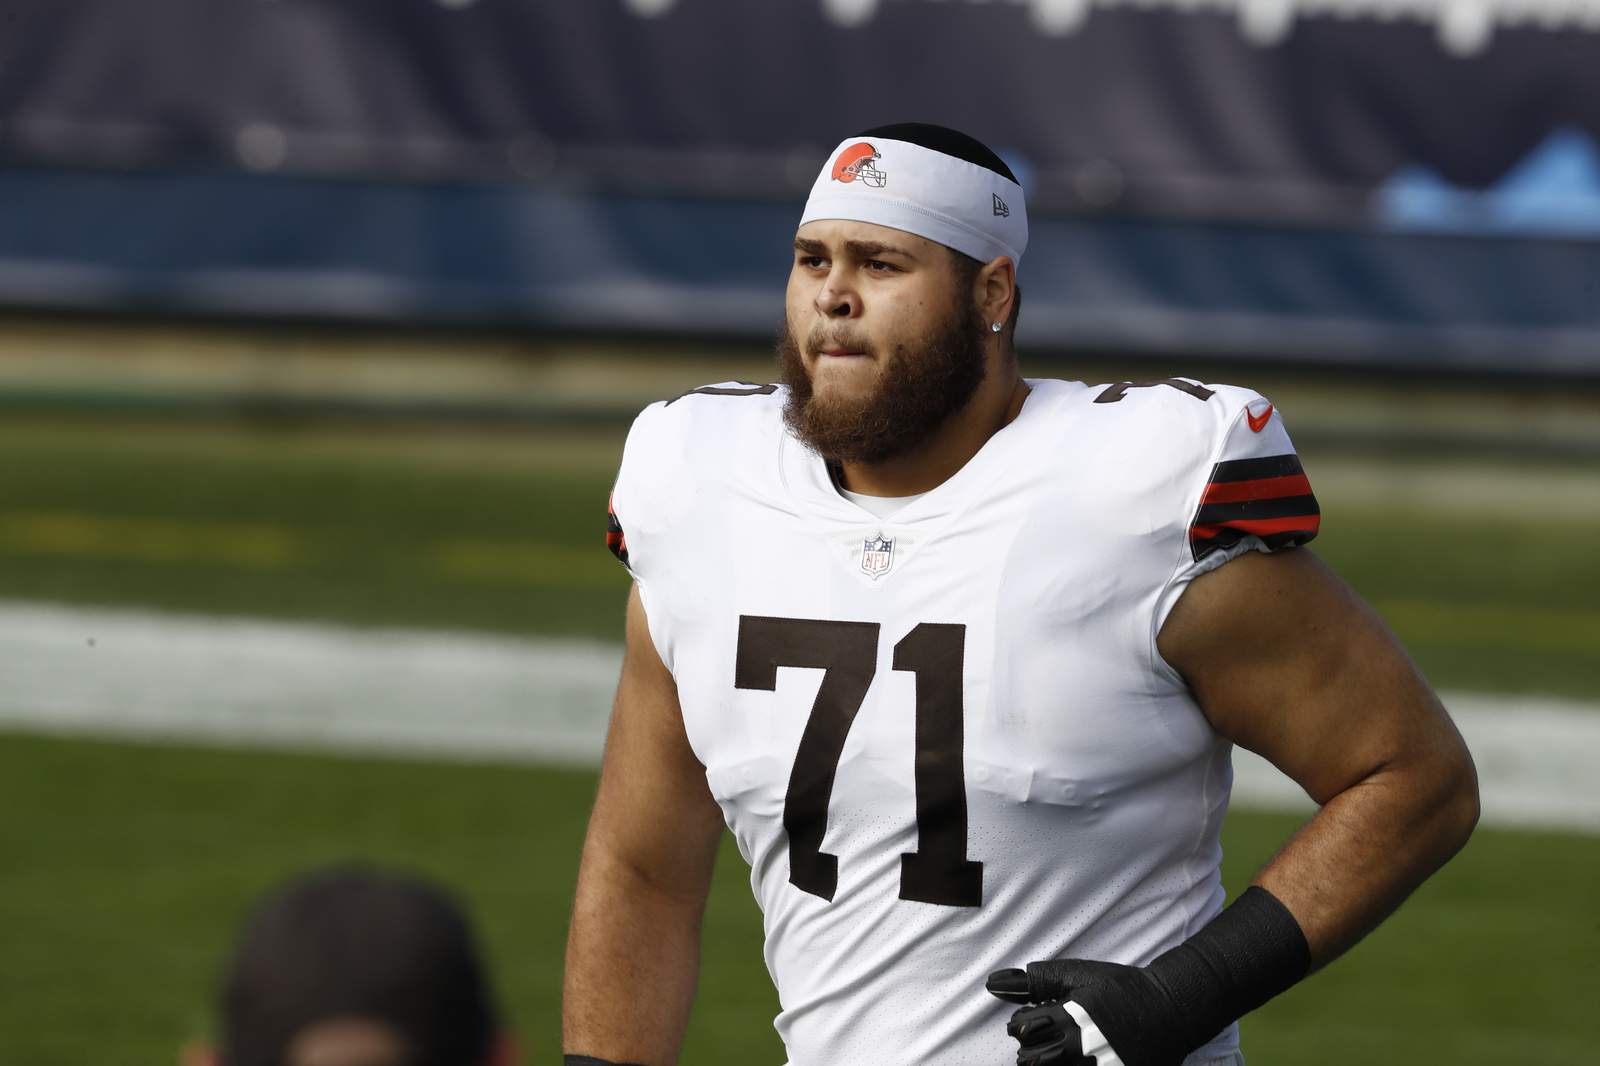 Browns lose another player vs; Jets, starting LT Wills out